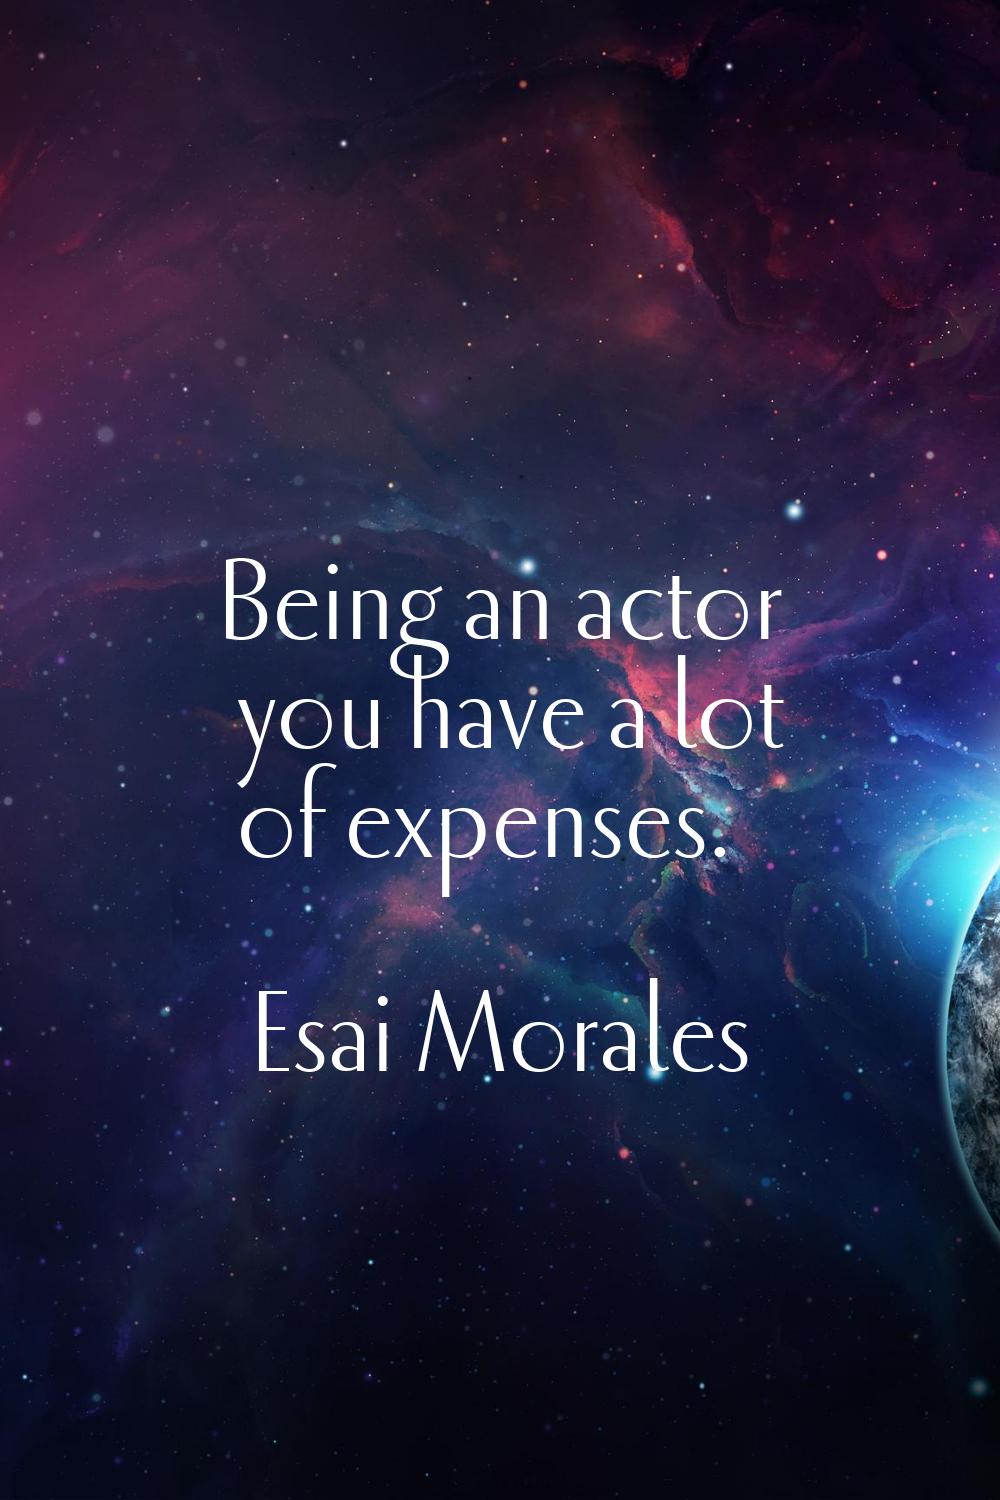 Being an actor you have a lot of expenses.